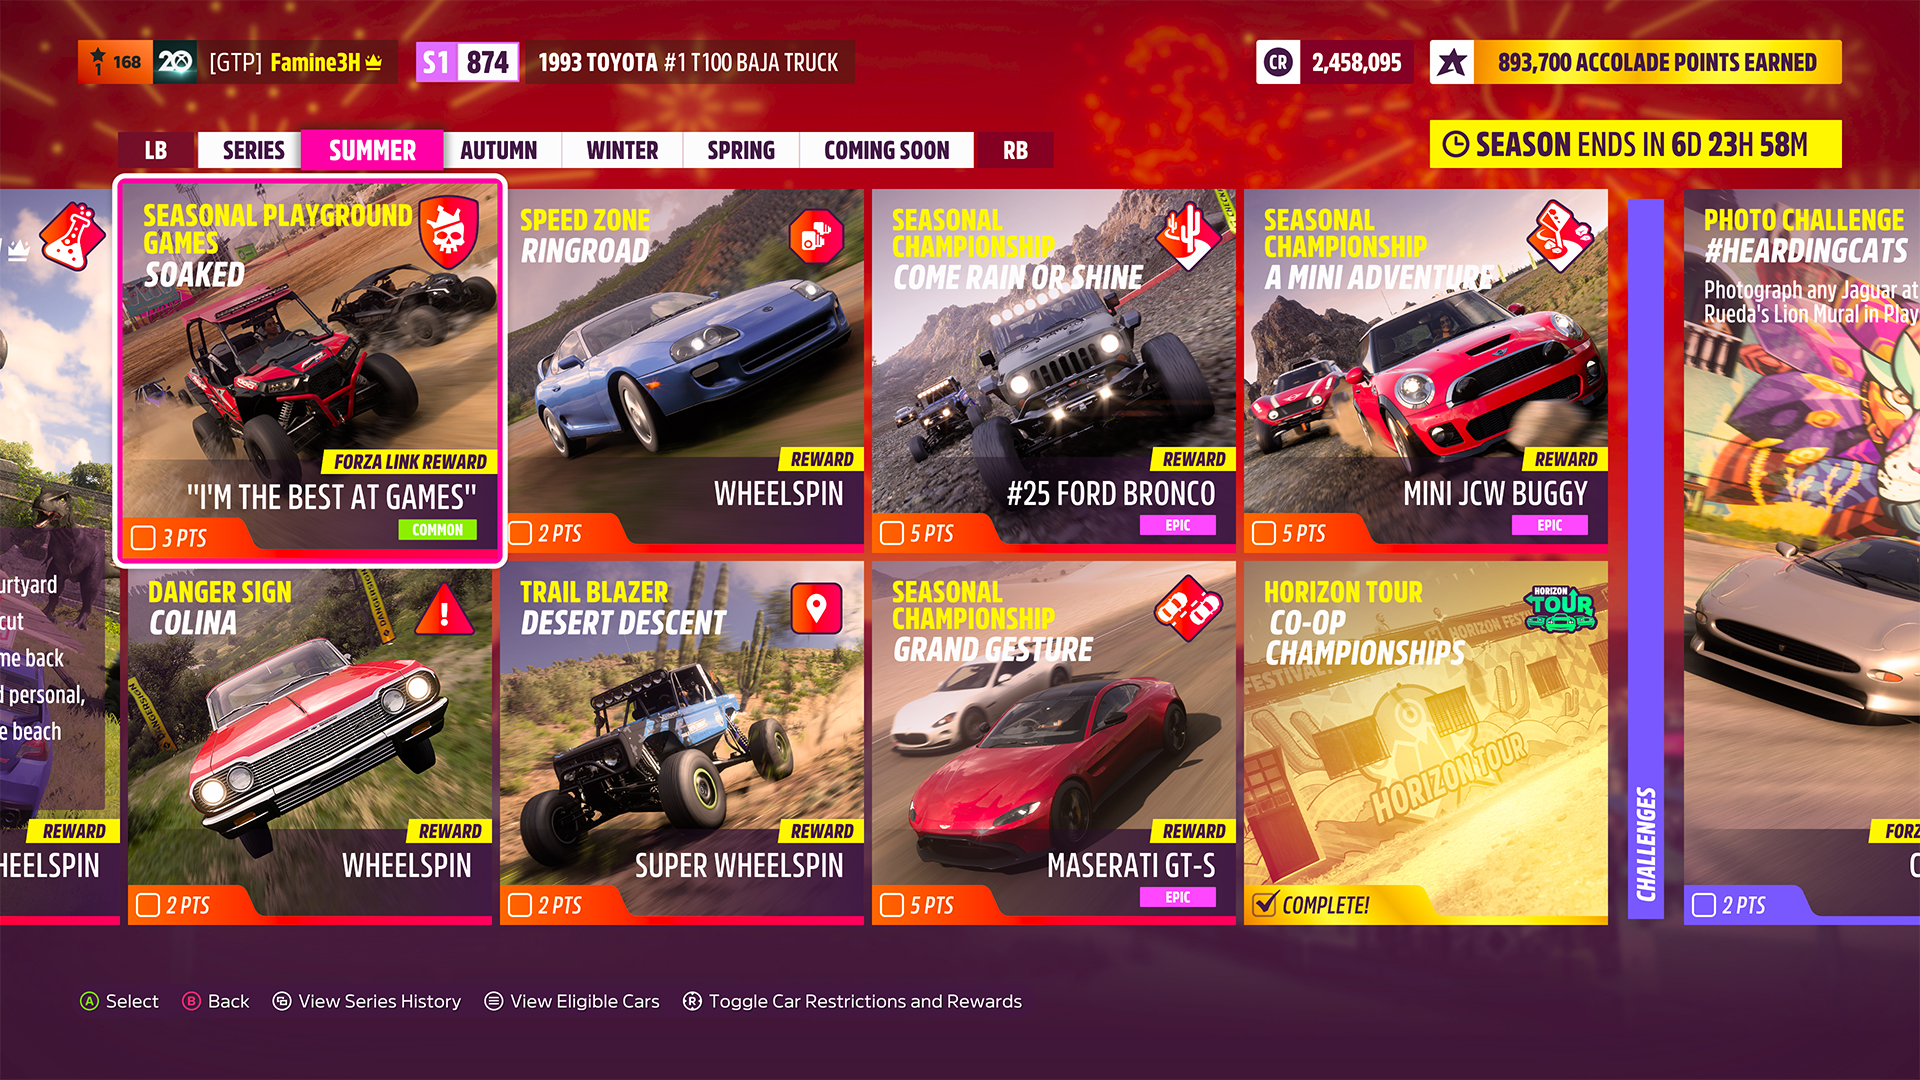 Forza Horizon 5 after 100+ hours: How does Forza Horizon 5 stack up against  its predecessor? - The SportsRush